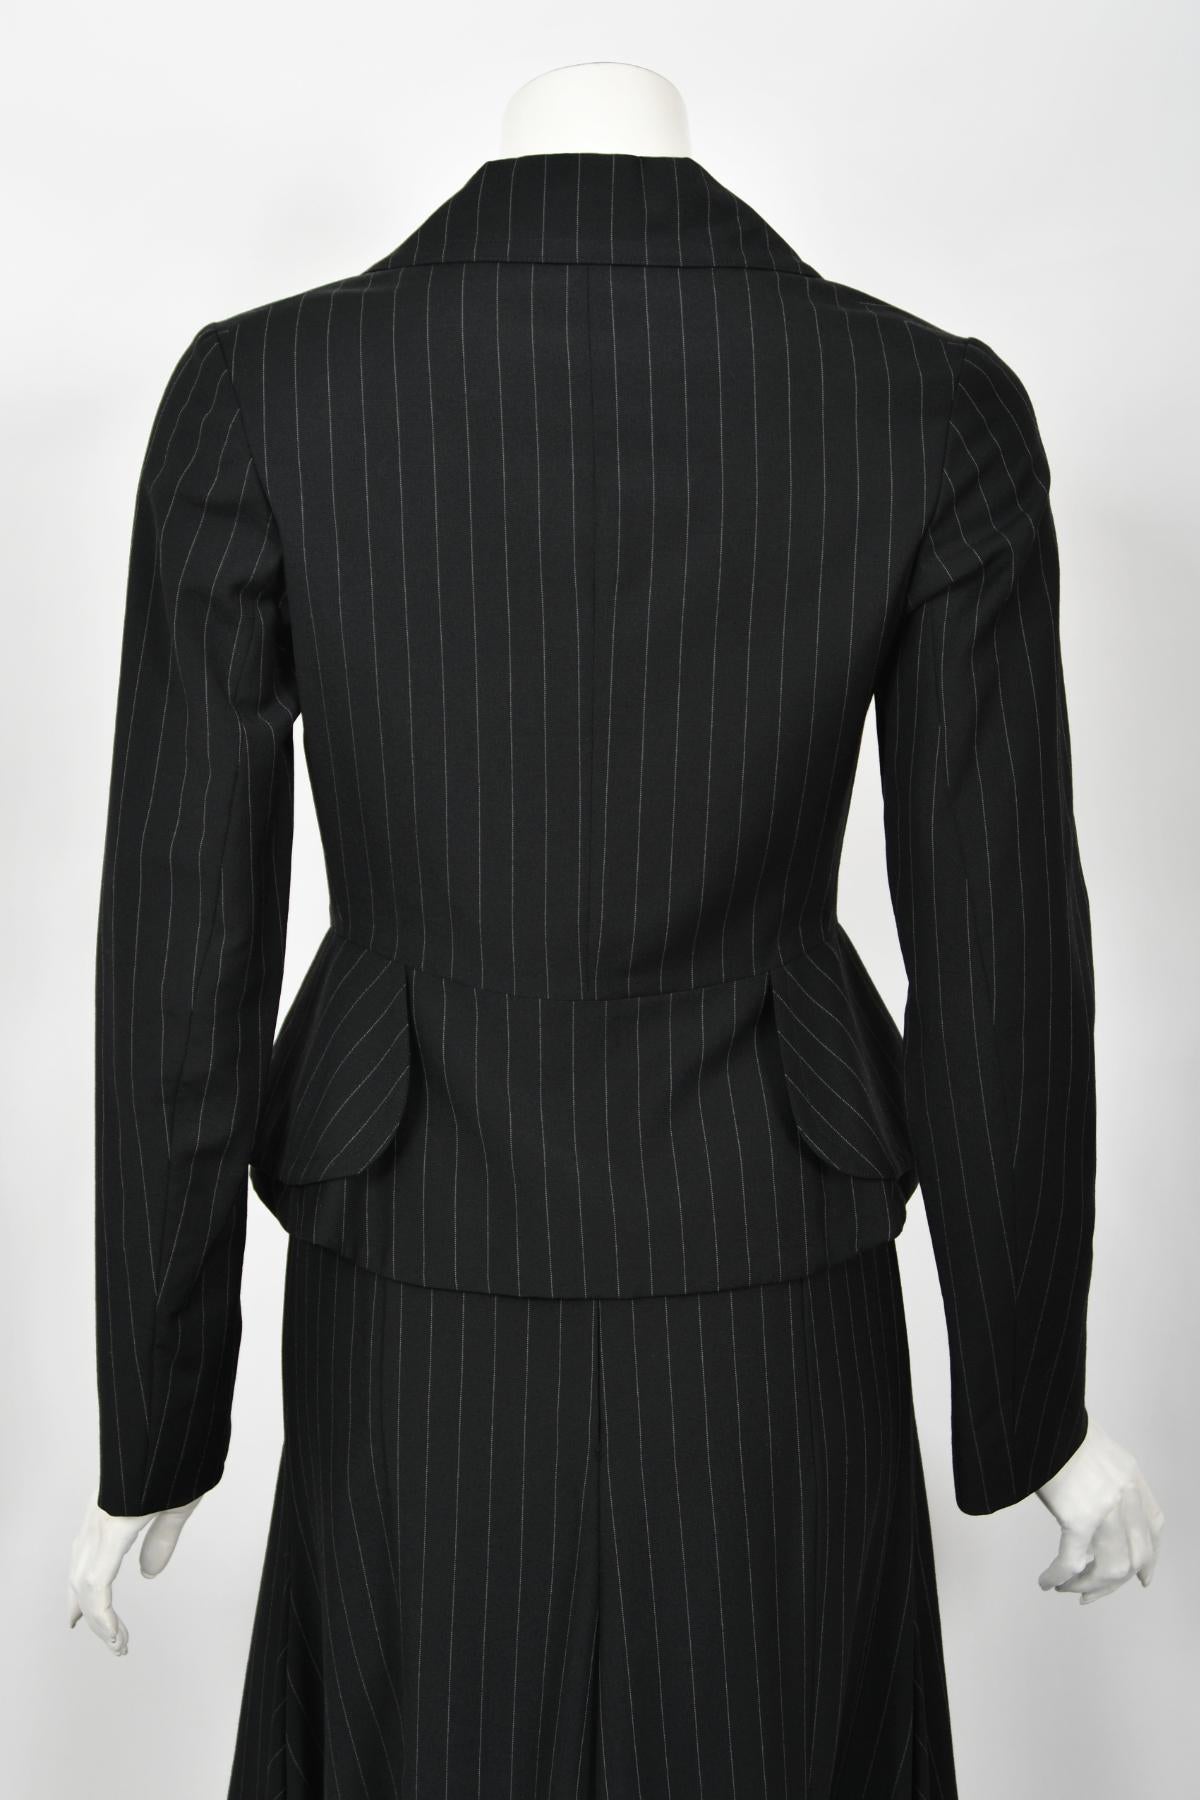 Archival 1994 Vivienne Westwood Pinstripe Wool Jacket and High-Low Trained Skirt For Sale 14